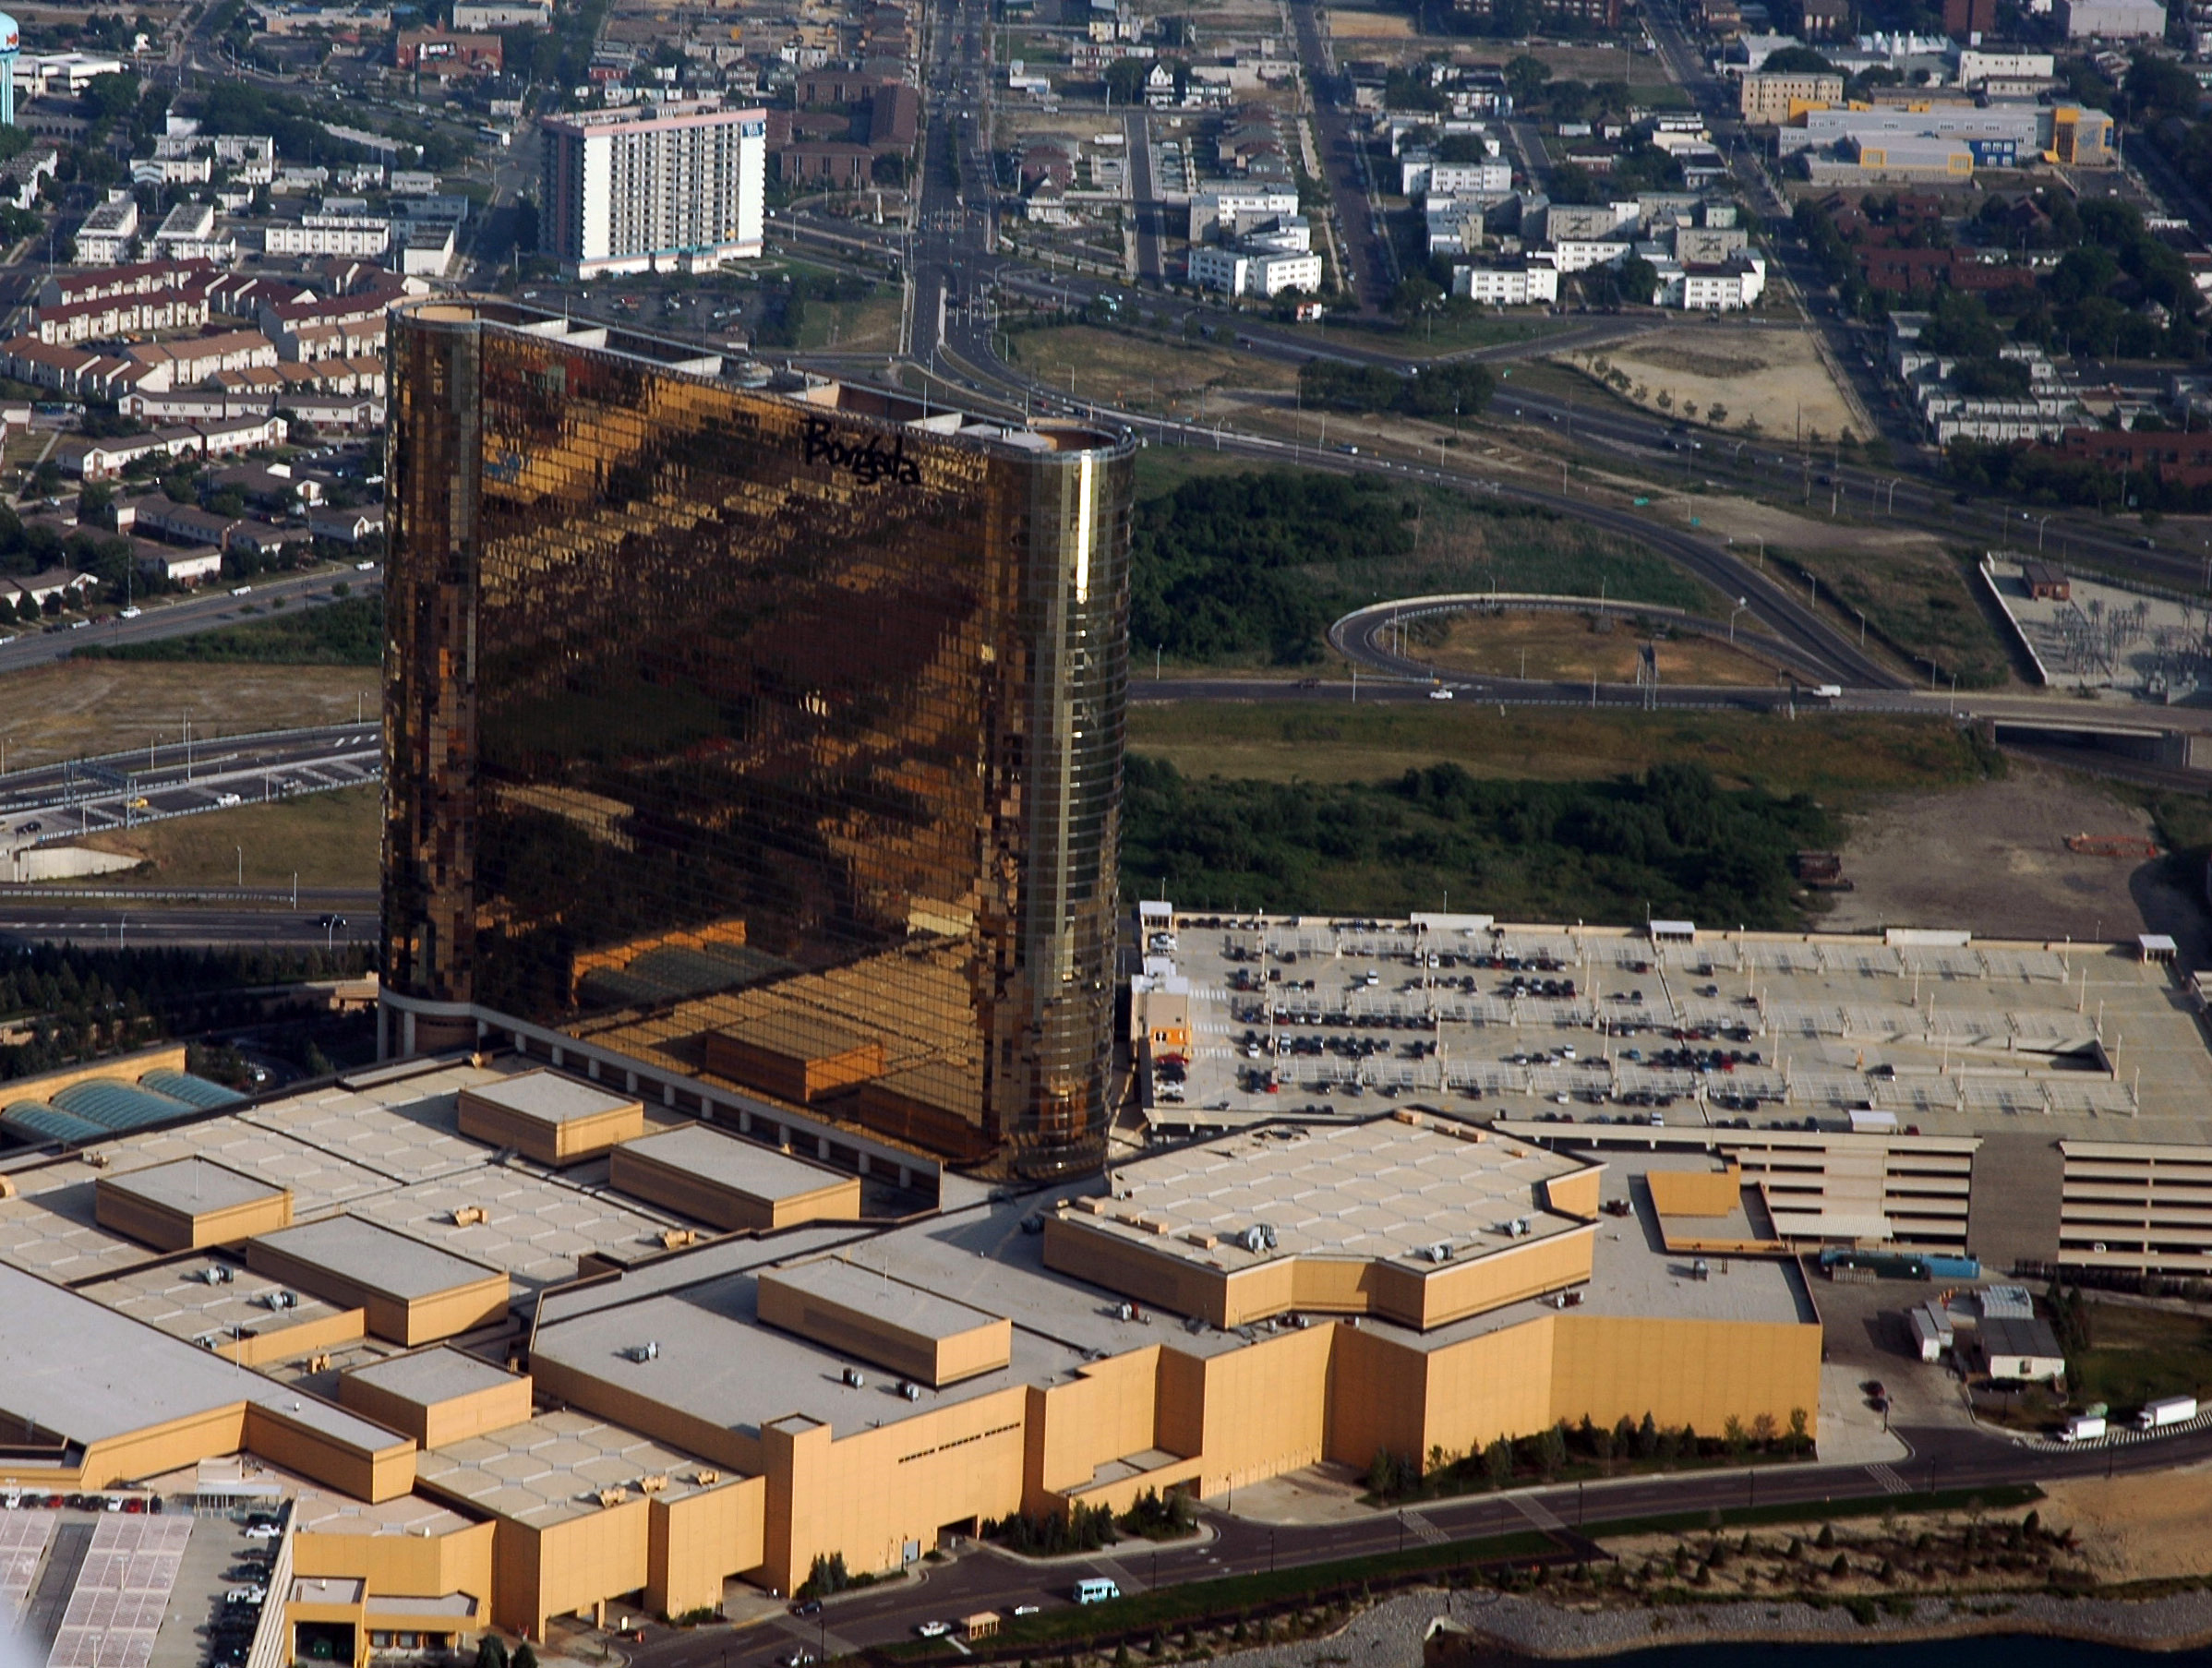 Is There A Mgm Casino In Atlantic City